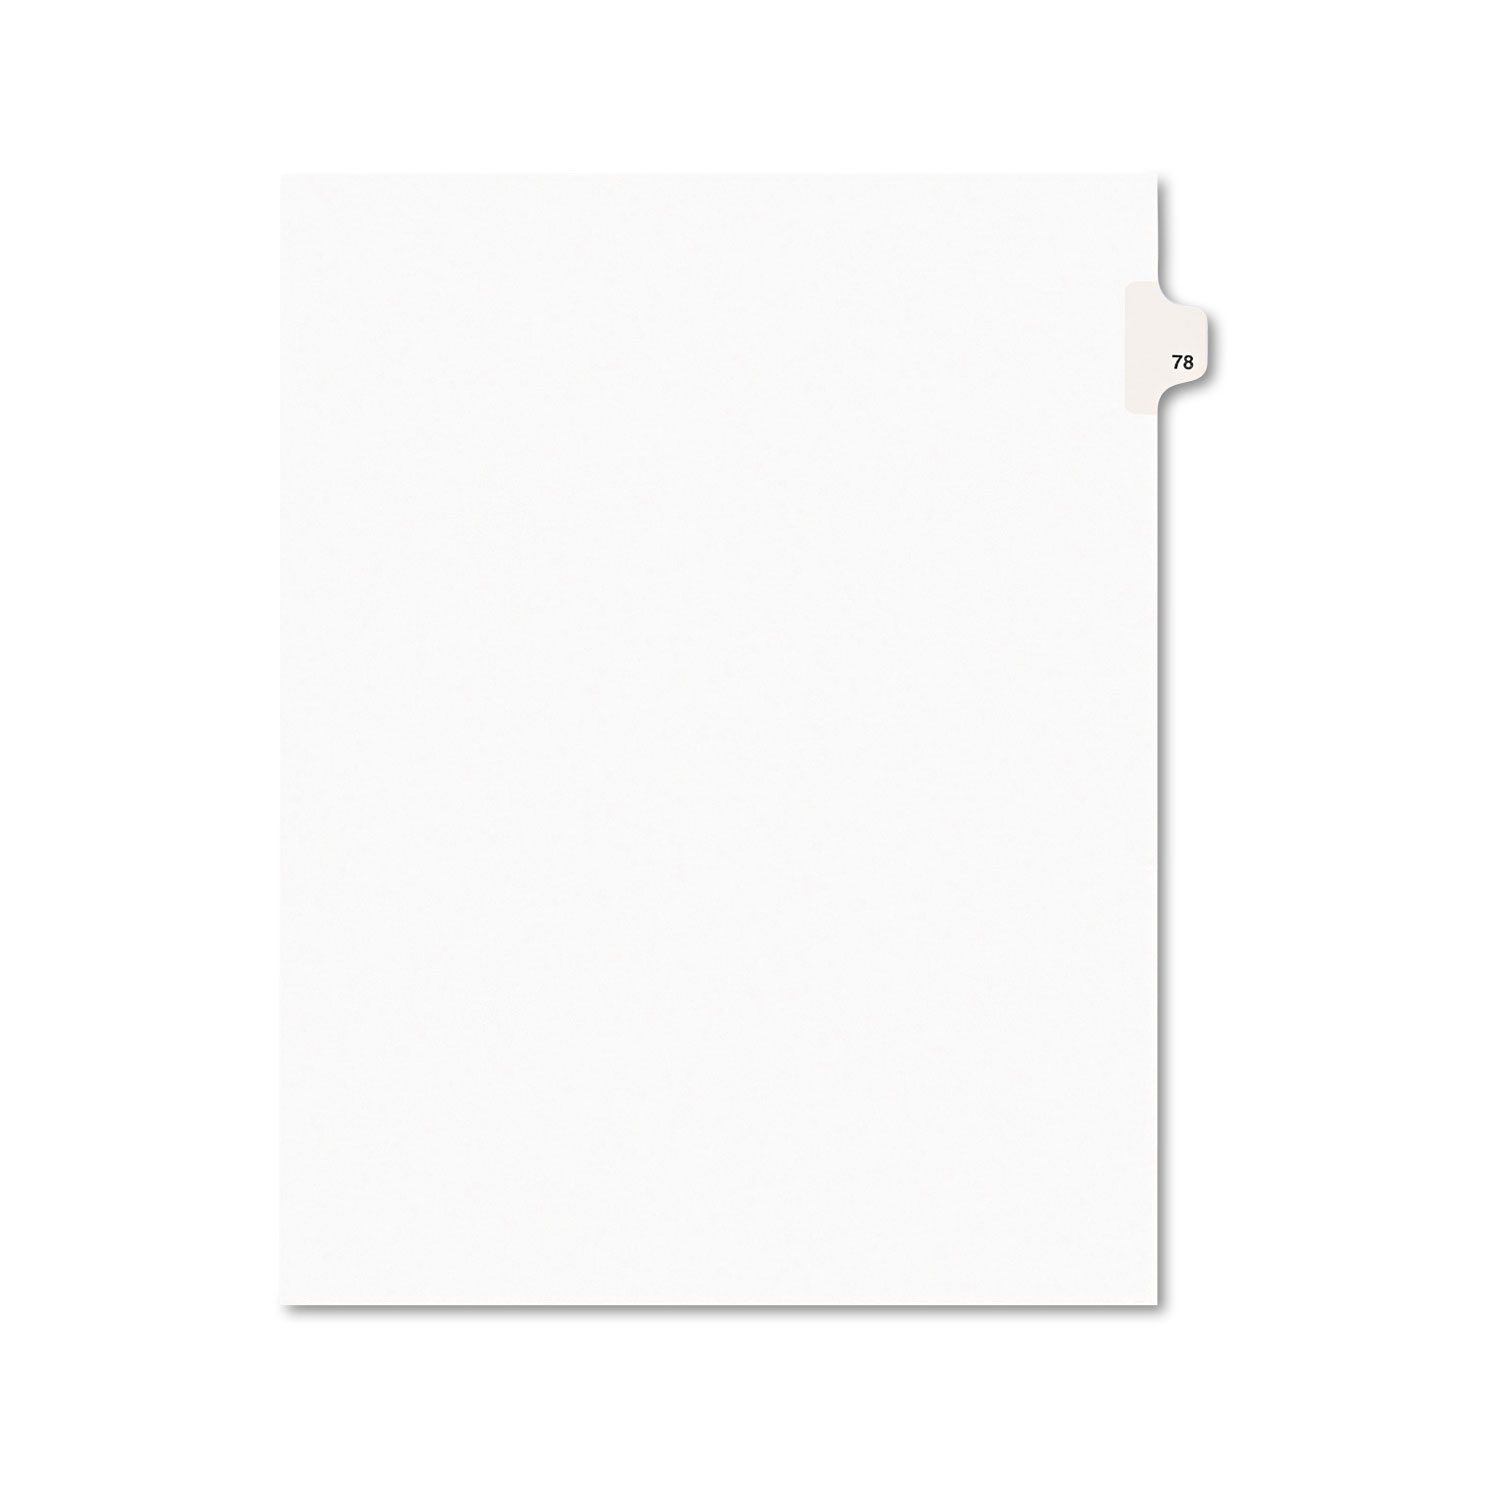  Avery 01078 Preprinted Legal Exhibit Side Tab Index Dividers, Avery Style, 10-Tab, 78, 11 x 8.5, White, 25/Pack (AVE01078) 